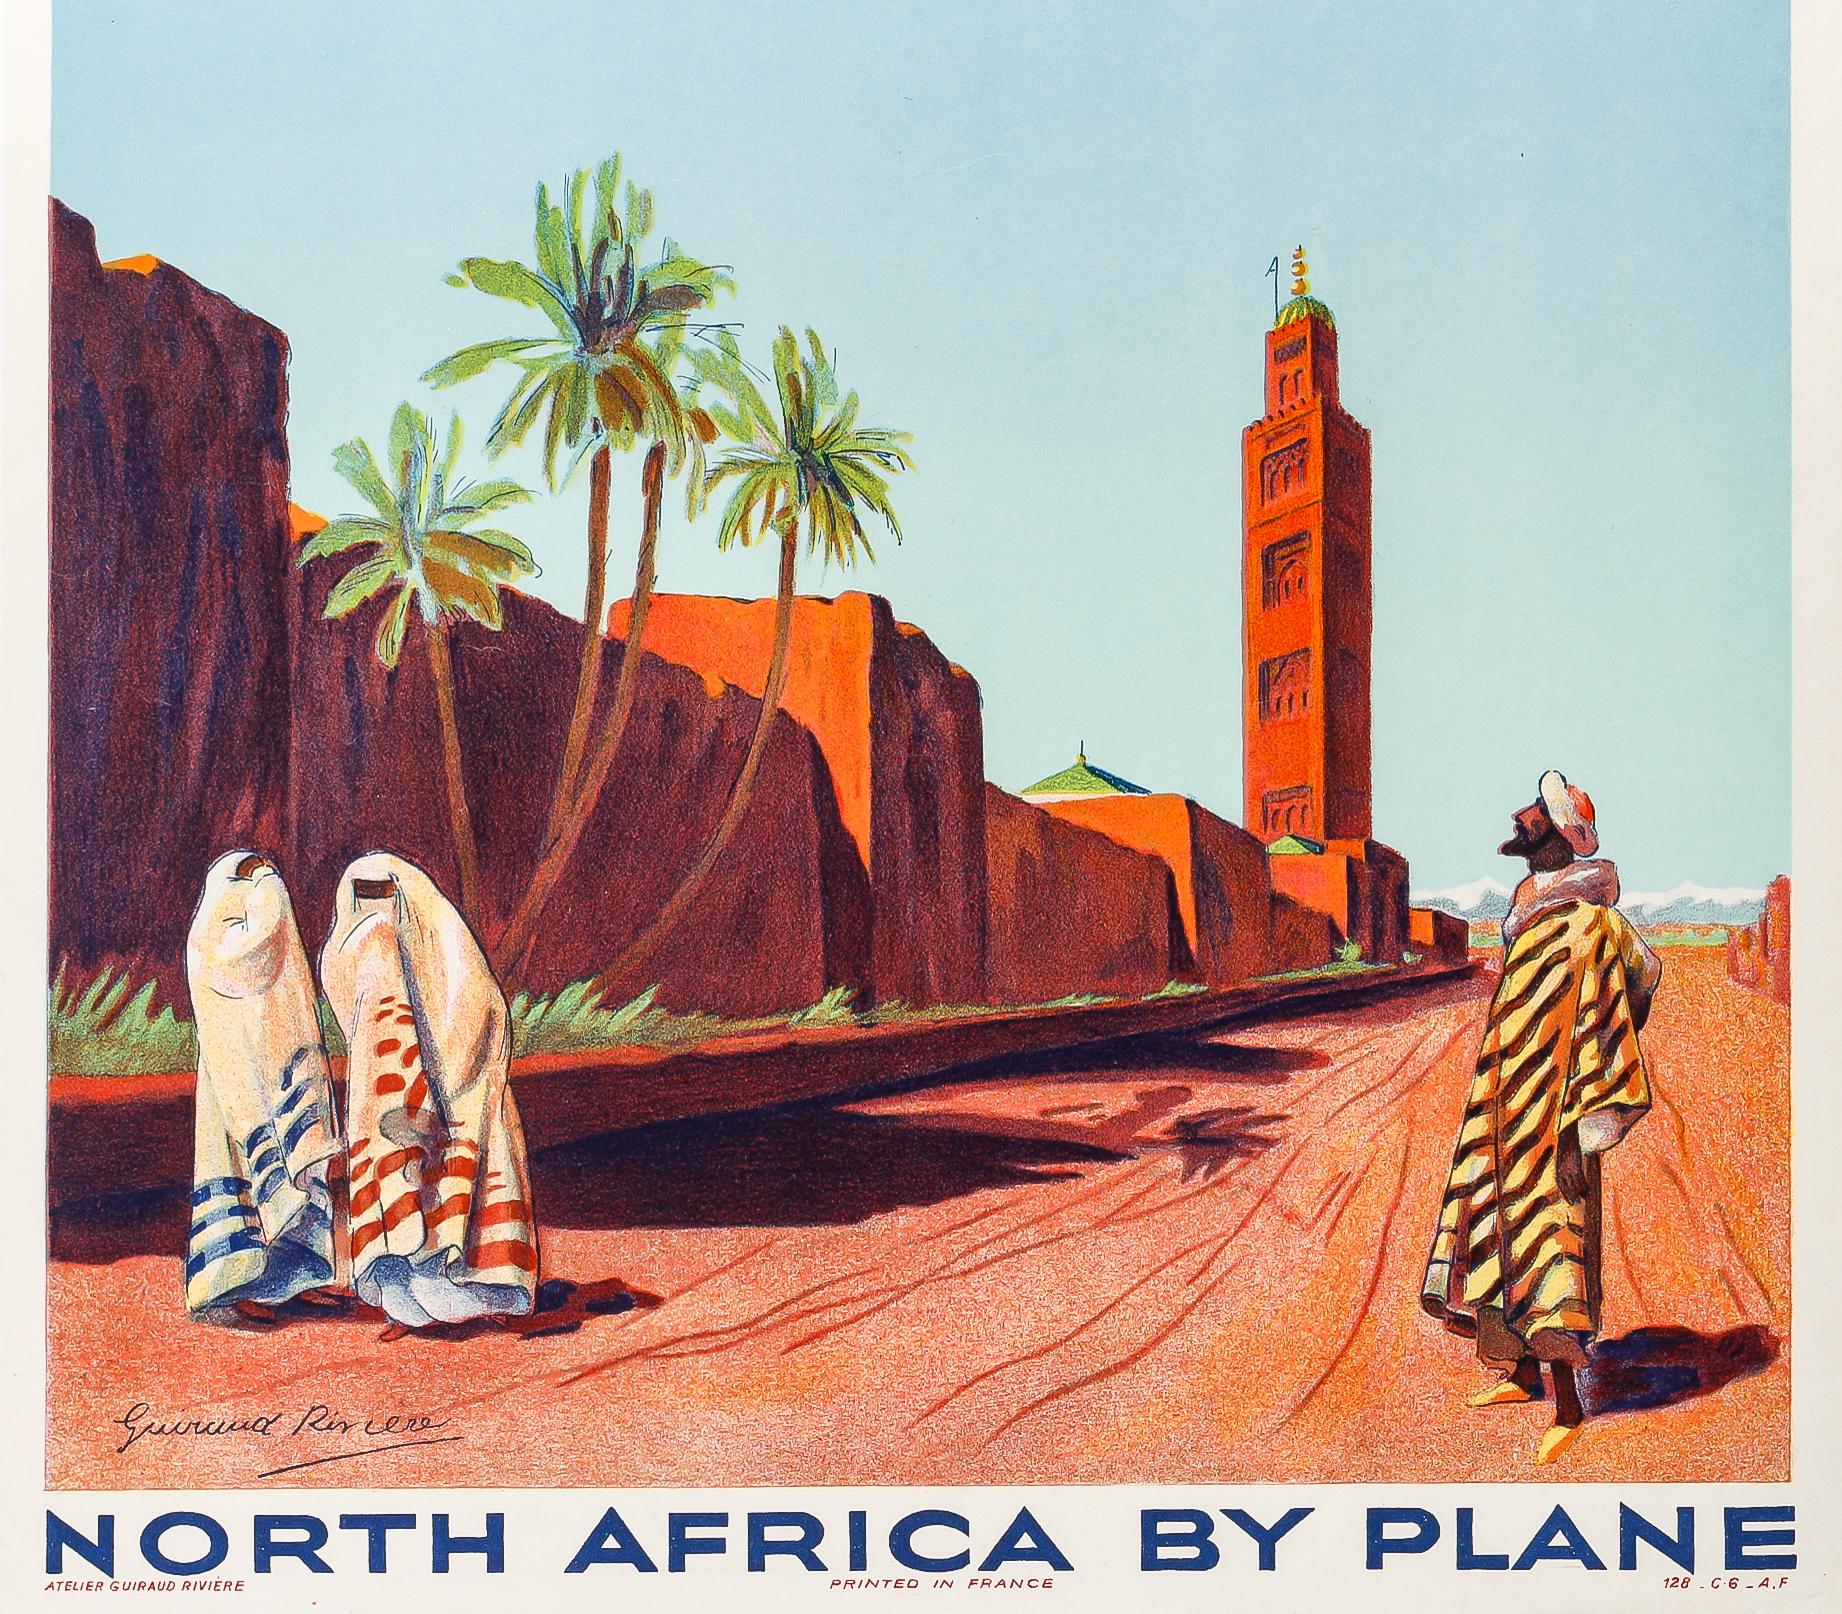 Original Air France Vintage Poster from 1934 for North Africa by Guiraud Riviere.

Artist: Guiraud Riviere
Title:  Air France – North Africa by plane
Date: 1934
Size: 12.1 x 19.5 in. / 30.7 x 49.5 cm.
Printer: Atelier Guiraud Rivière
Materials and